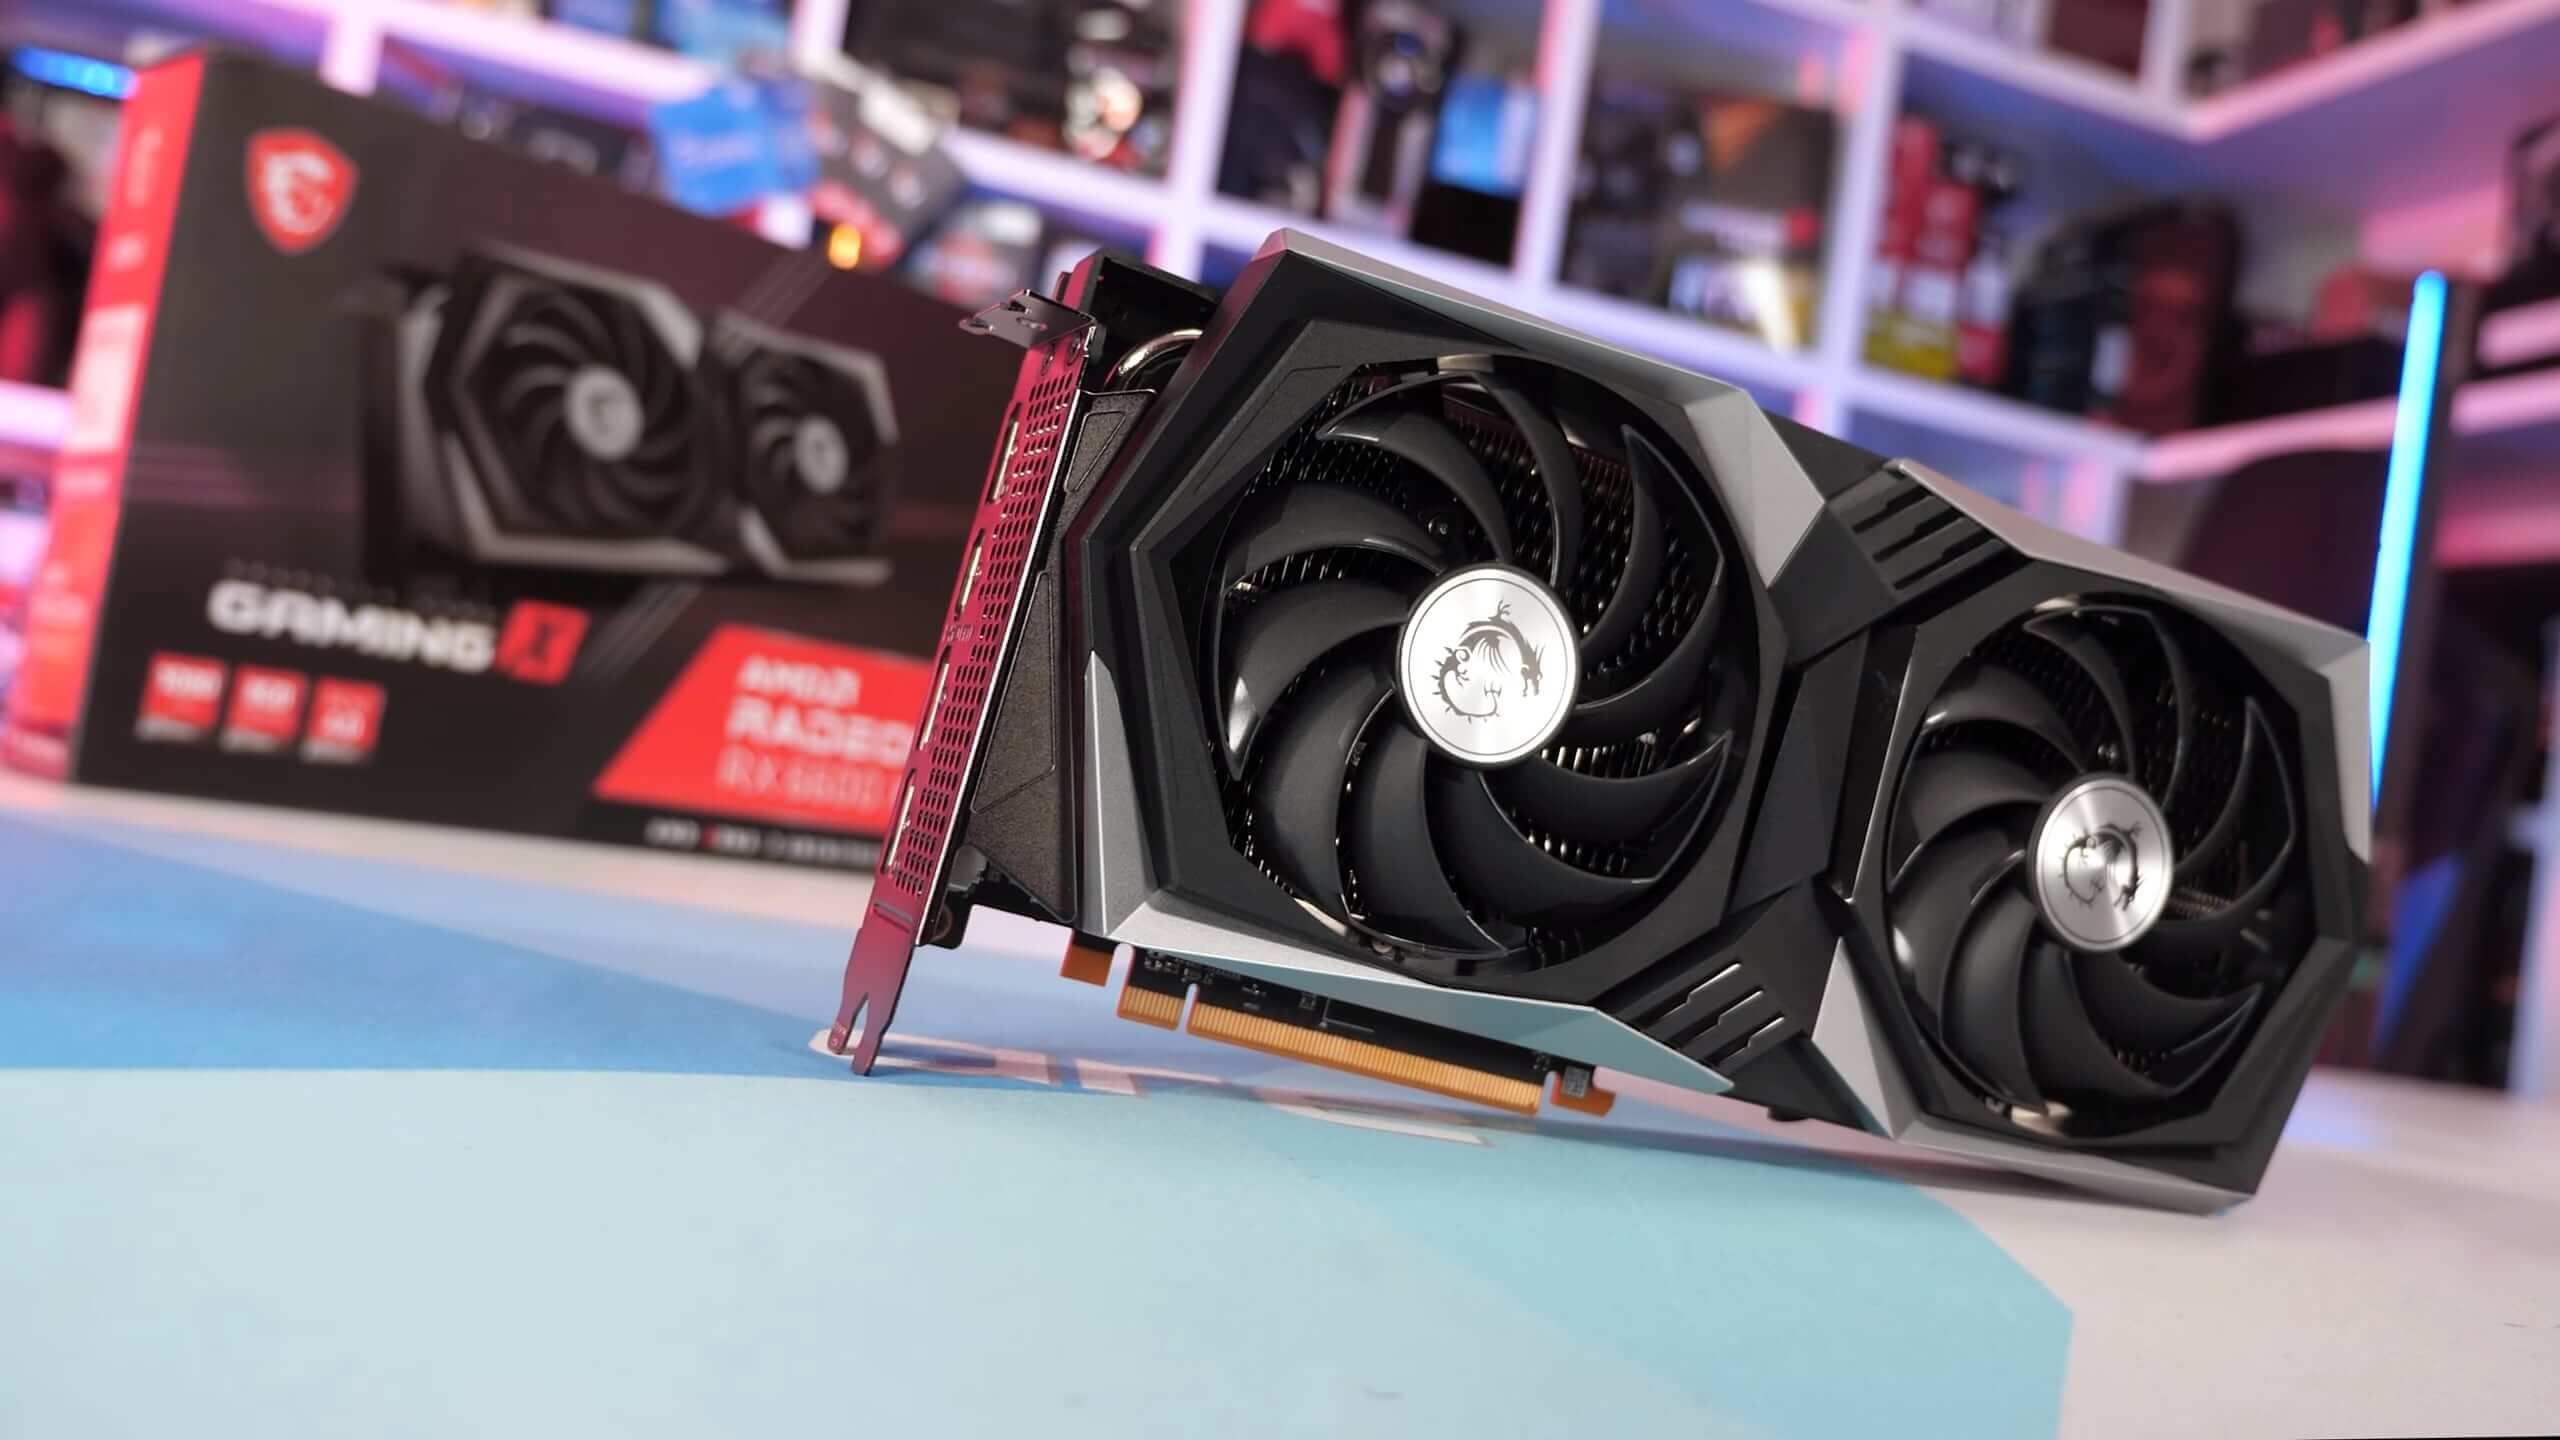 Has the Radeon RX 6600 XT lived up to AMD's claim of improved availability?